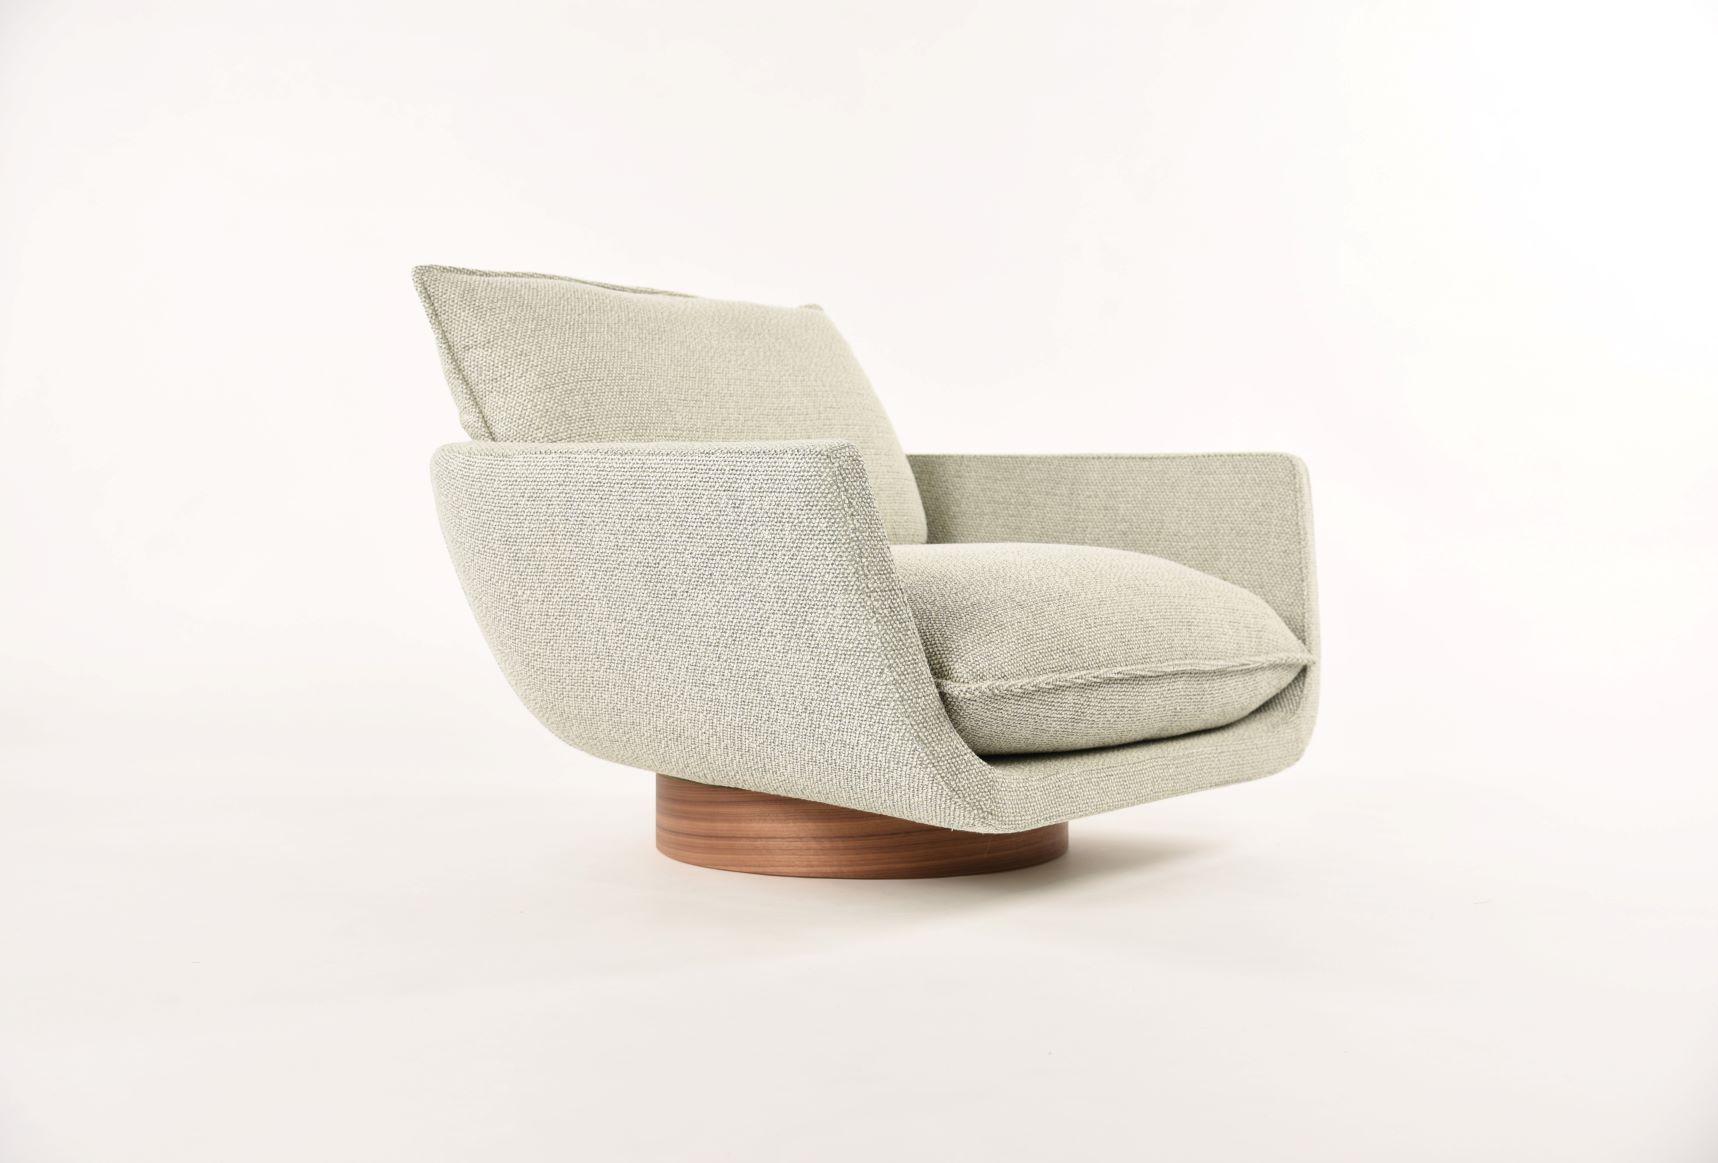 This in-stock Rua Ipanema lounge chair by Yabu Pushelberg in standard height swivel base is presented in Aberdeen Avenue Willow fabric from the Man of Parts collection. 

Crafted in Italy, the Rua Ipanema lounge chair comes on a standard or